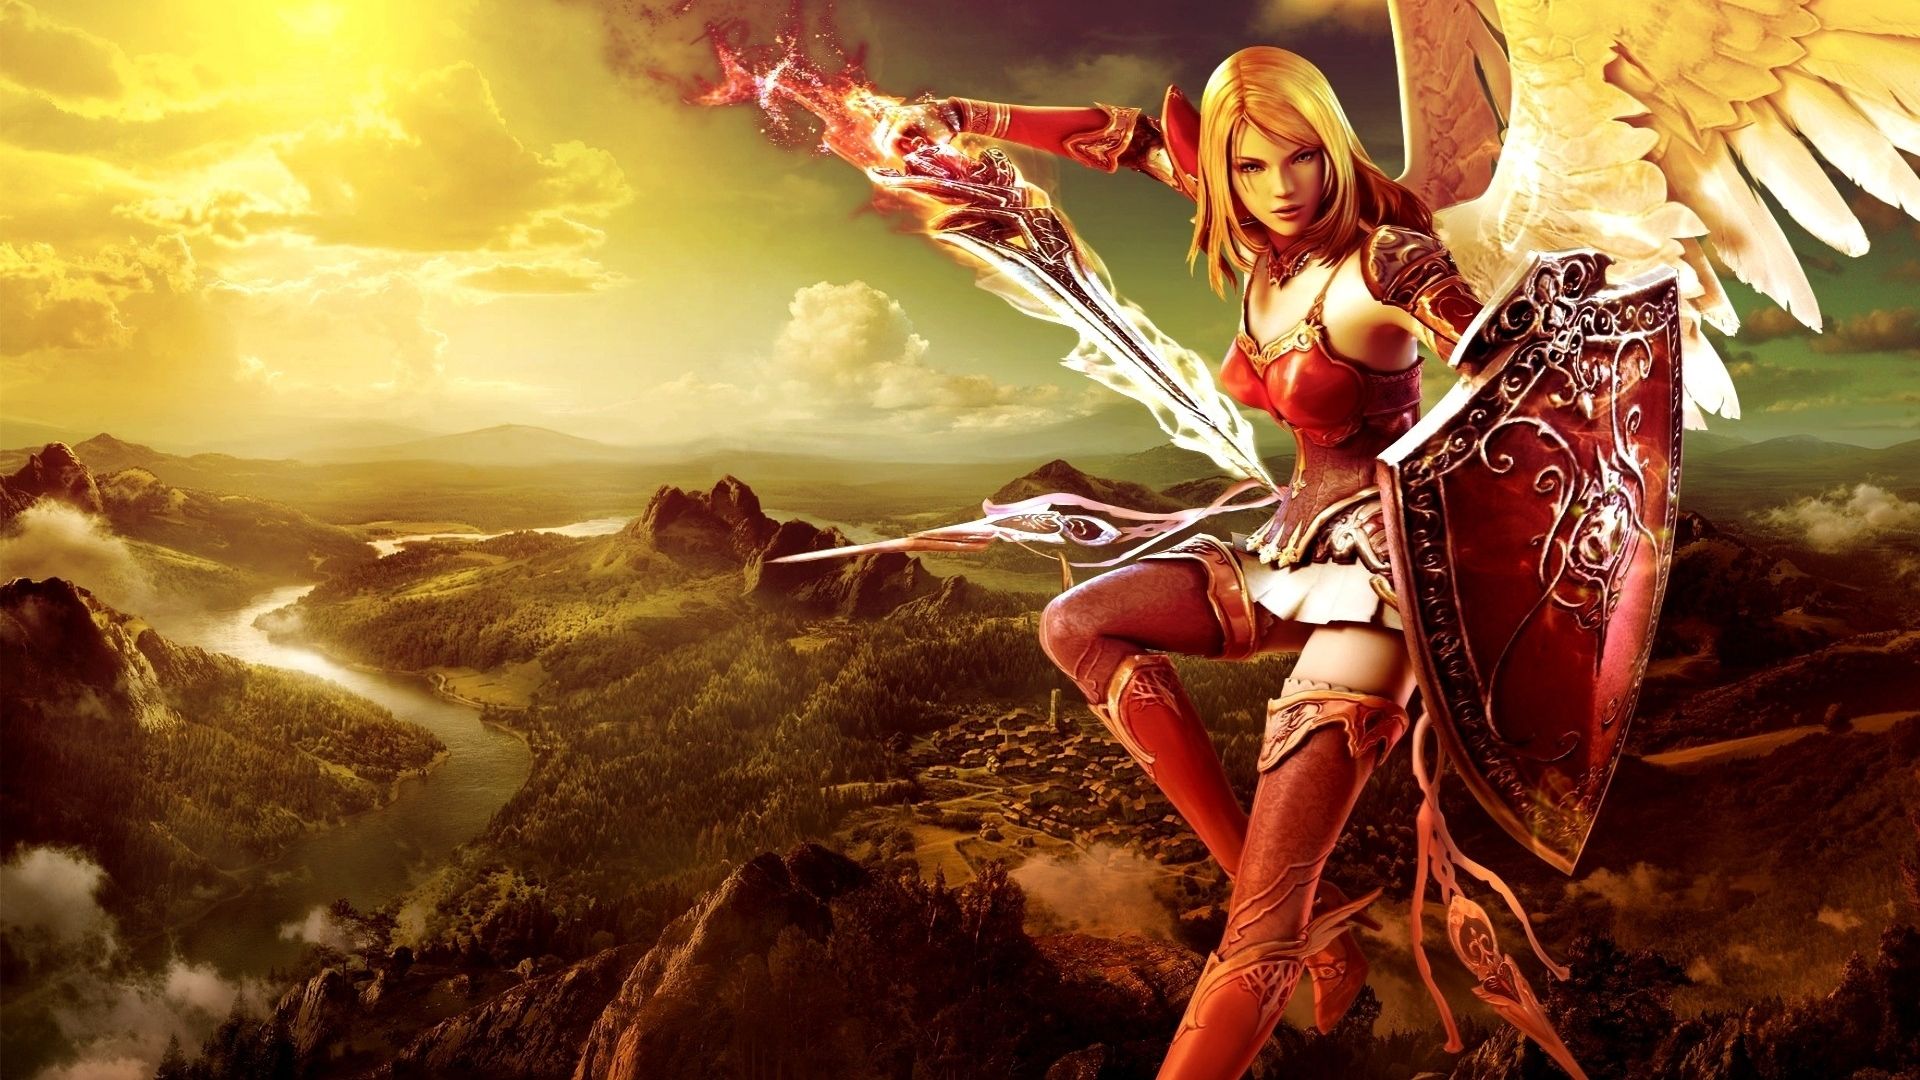 Free download Female Warrior Wallpaper High Definition High Quality [1920x1200] for your Desktop, Mobile & Tablet. Explore Woman Warrior Wallpaper. Warrior Wallpaper HD, Female Warrior Wallpaper, Anime Female Warrior Wallpaper